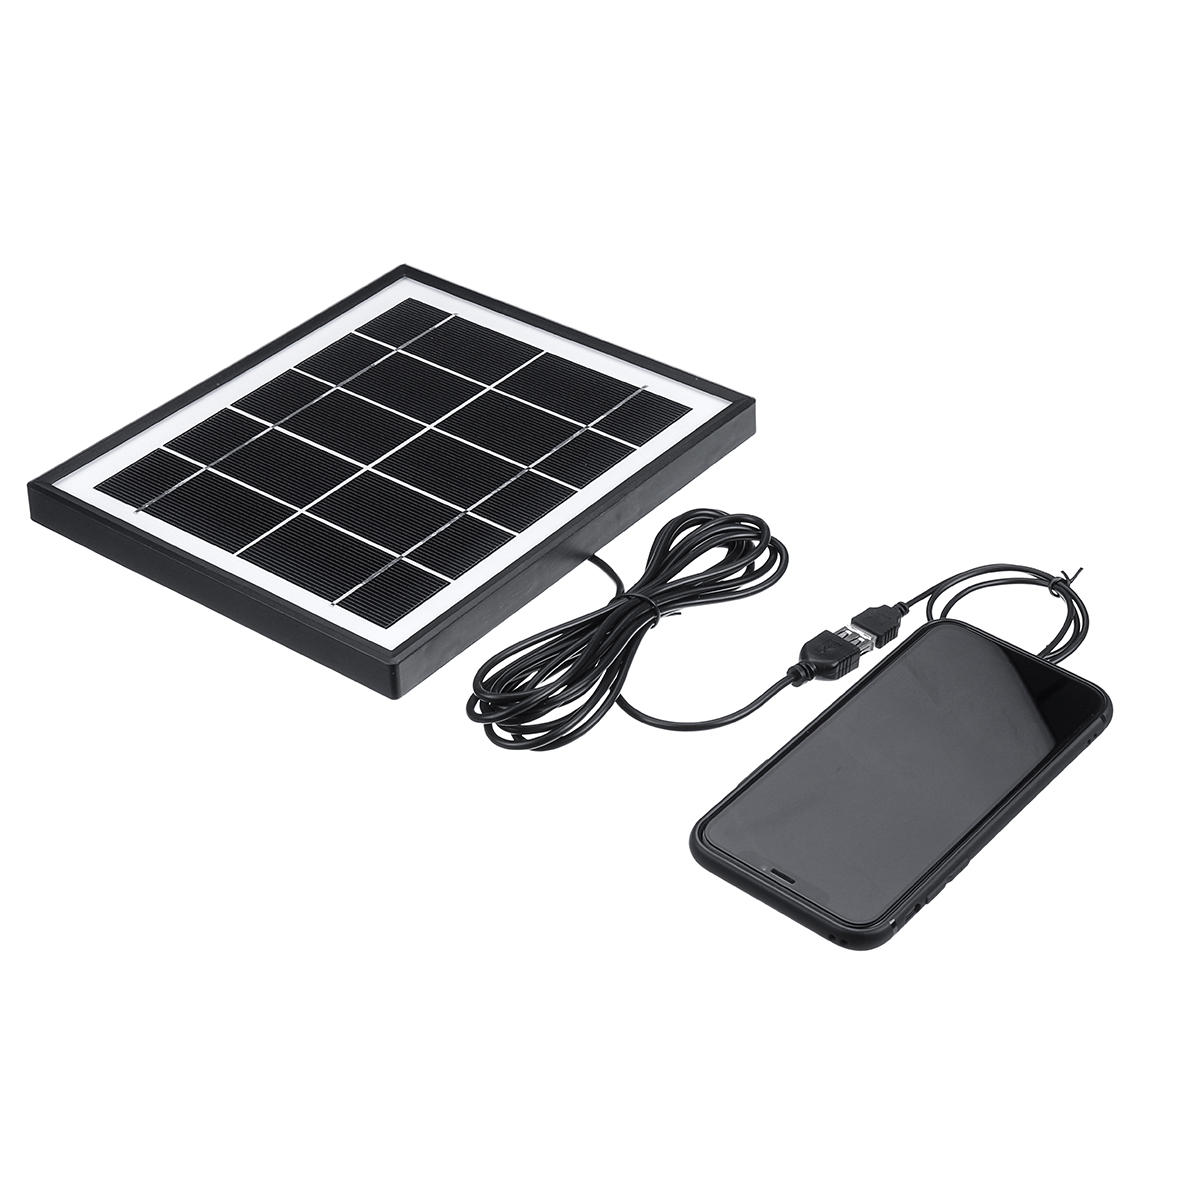 5V 5.5W Monocrystalline Silicon Solar Panel Charging Board with USB Interface + 3m Cable for Solar S